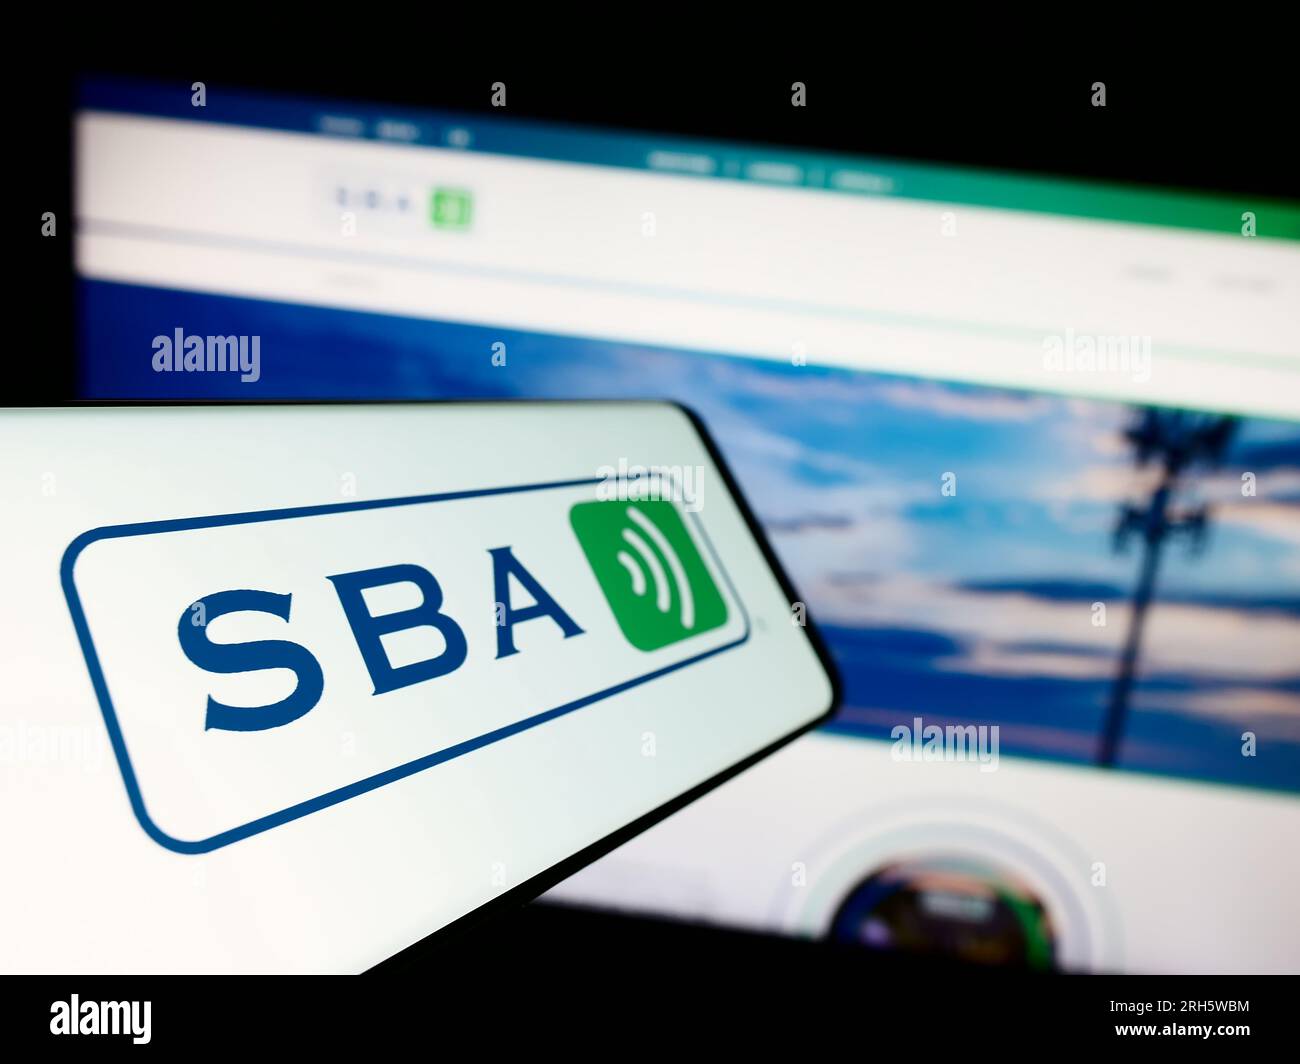 Smartphone with logo of American company SBA Communications Corporation on screen in front of business website. Focus on left of phone display. Stock Photo